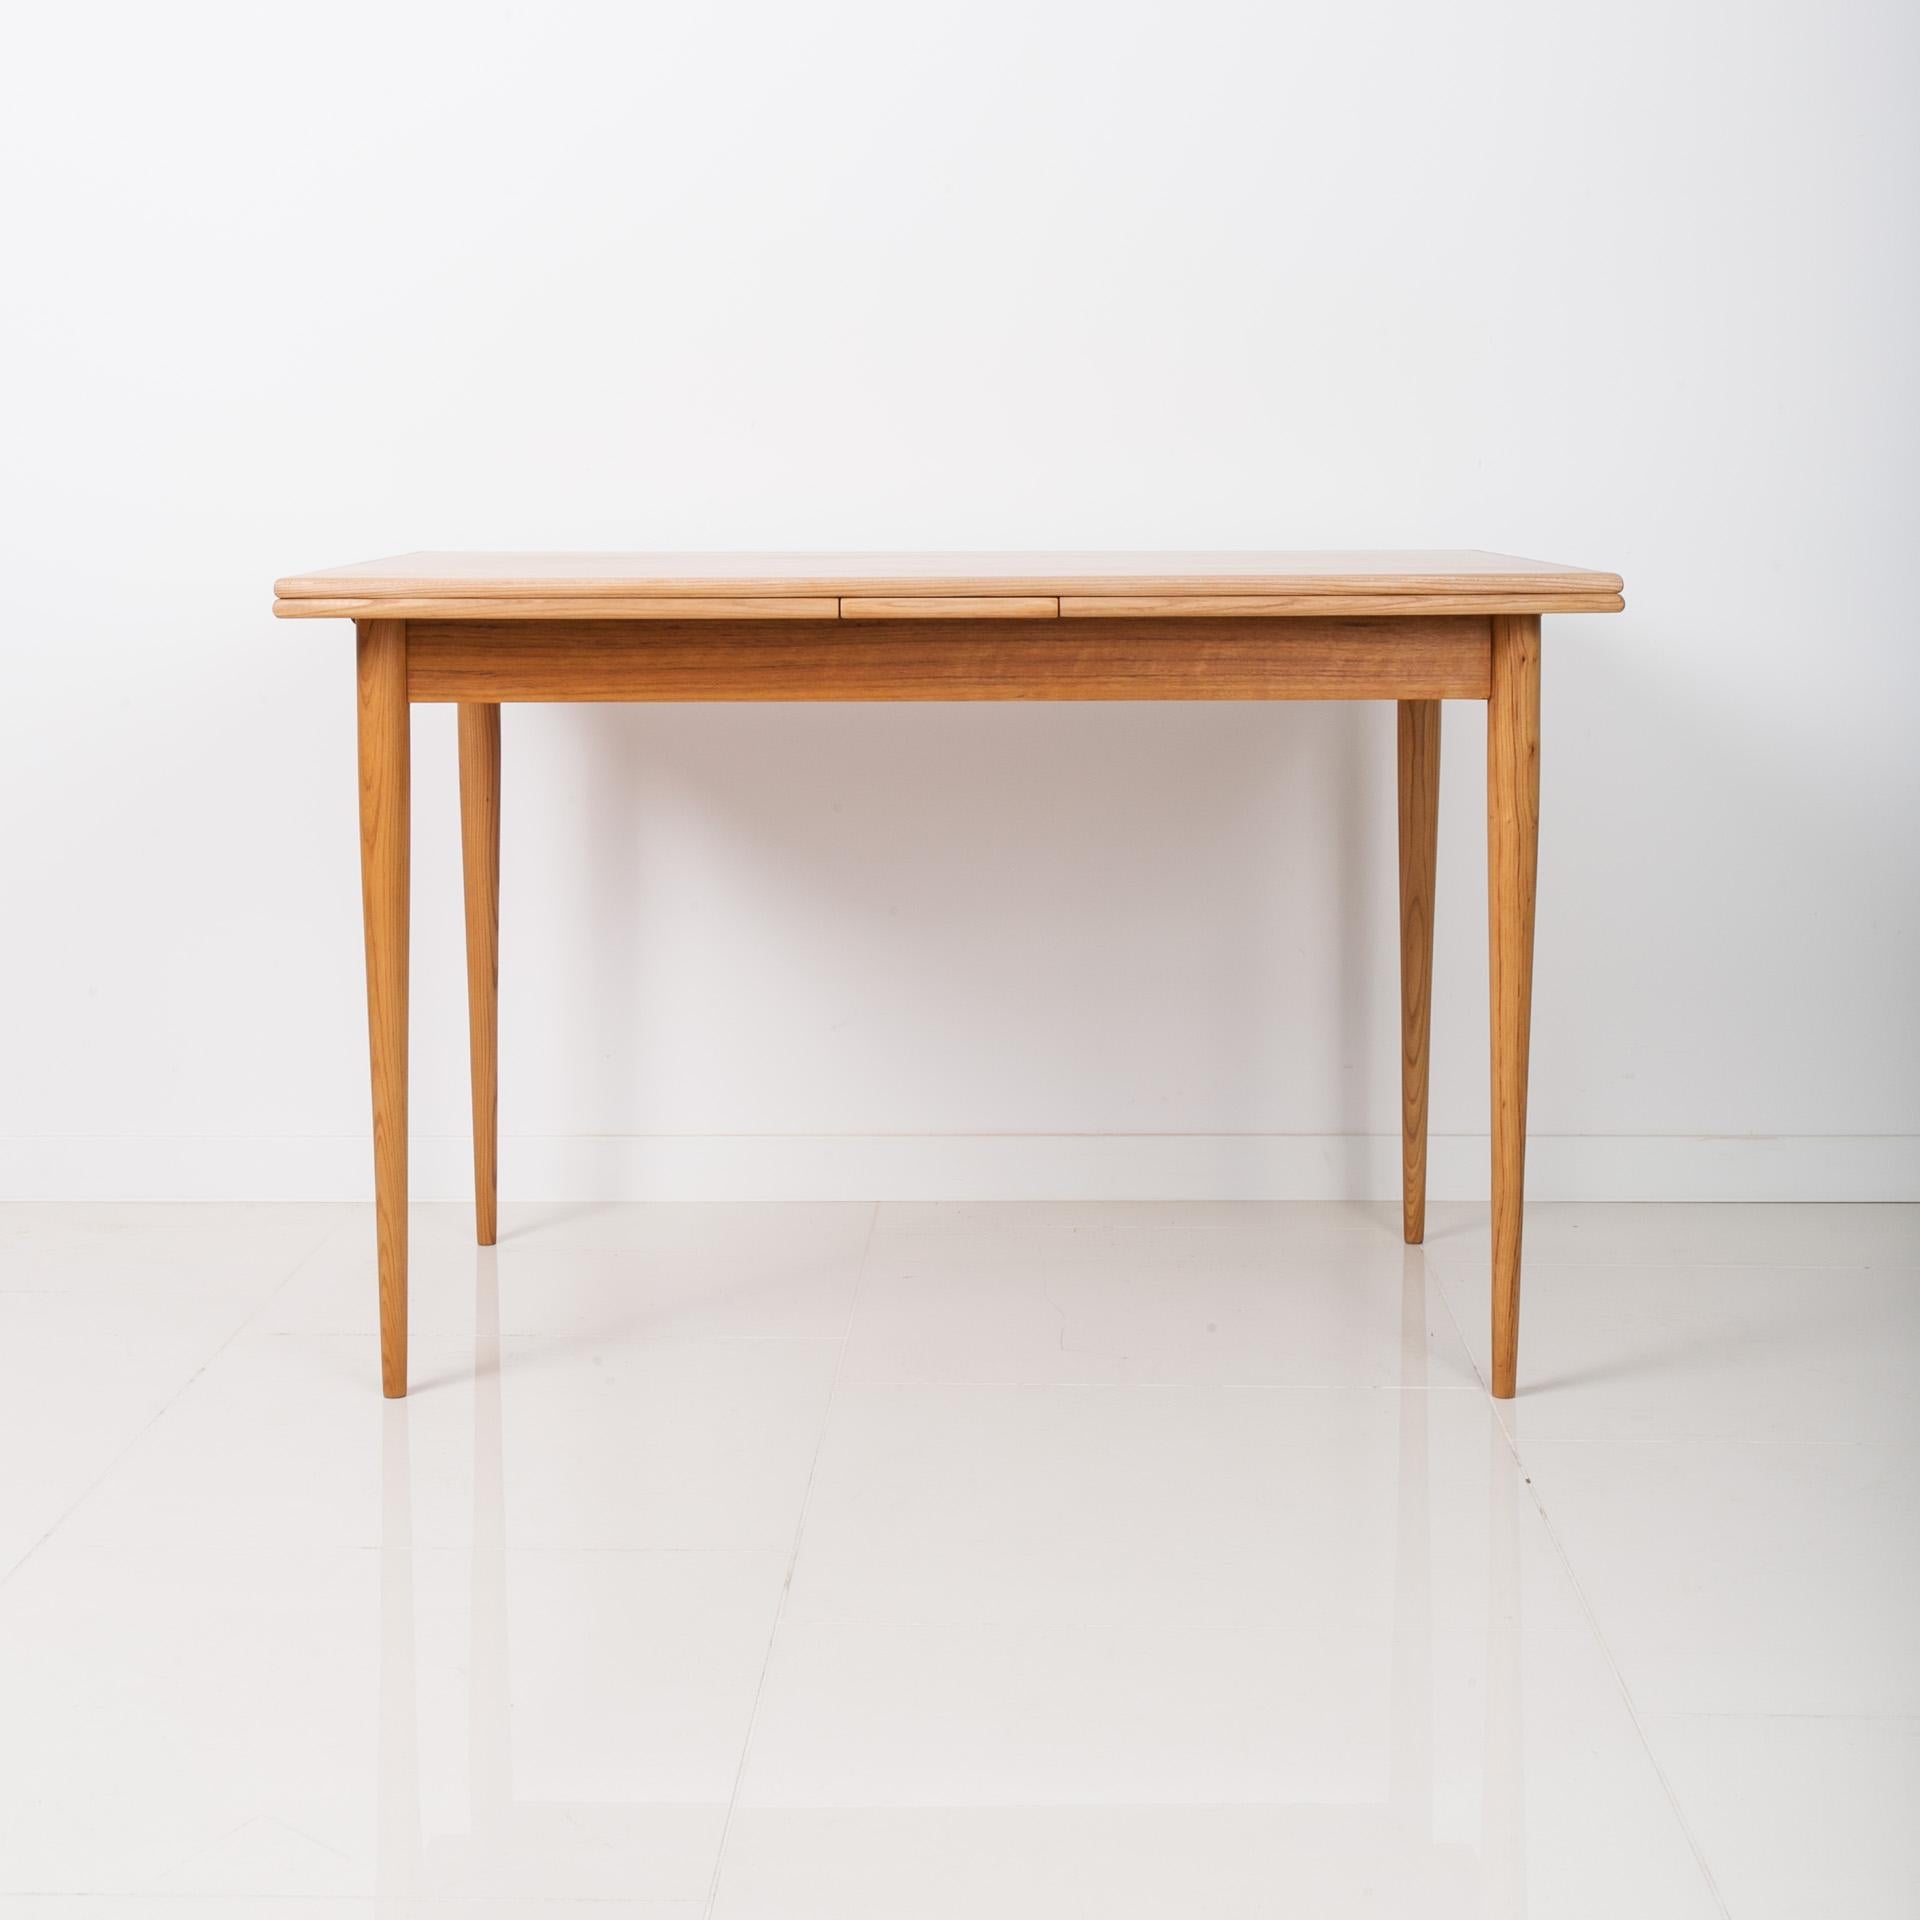 This beautiful coffee table was made in the 1960s. It features 4 slender legs and top made of teak wood. It is a perfect example of top-quality Danish design and great craftsmanship. The piece is professionally renovated – old coatings have been